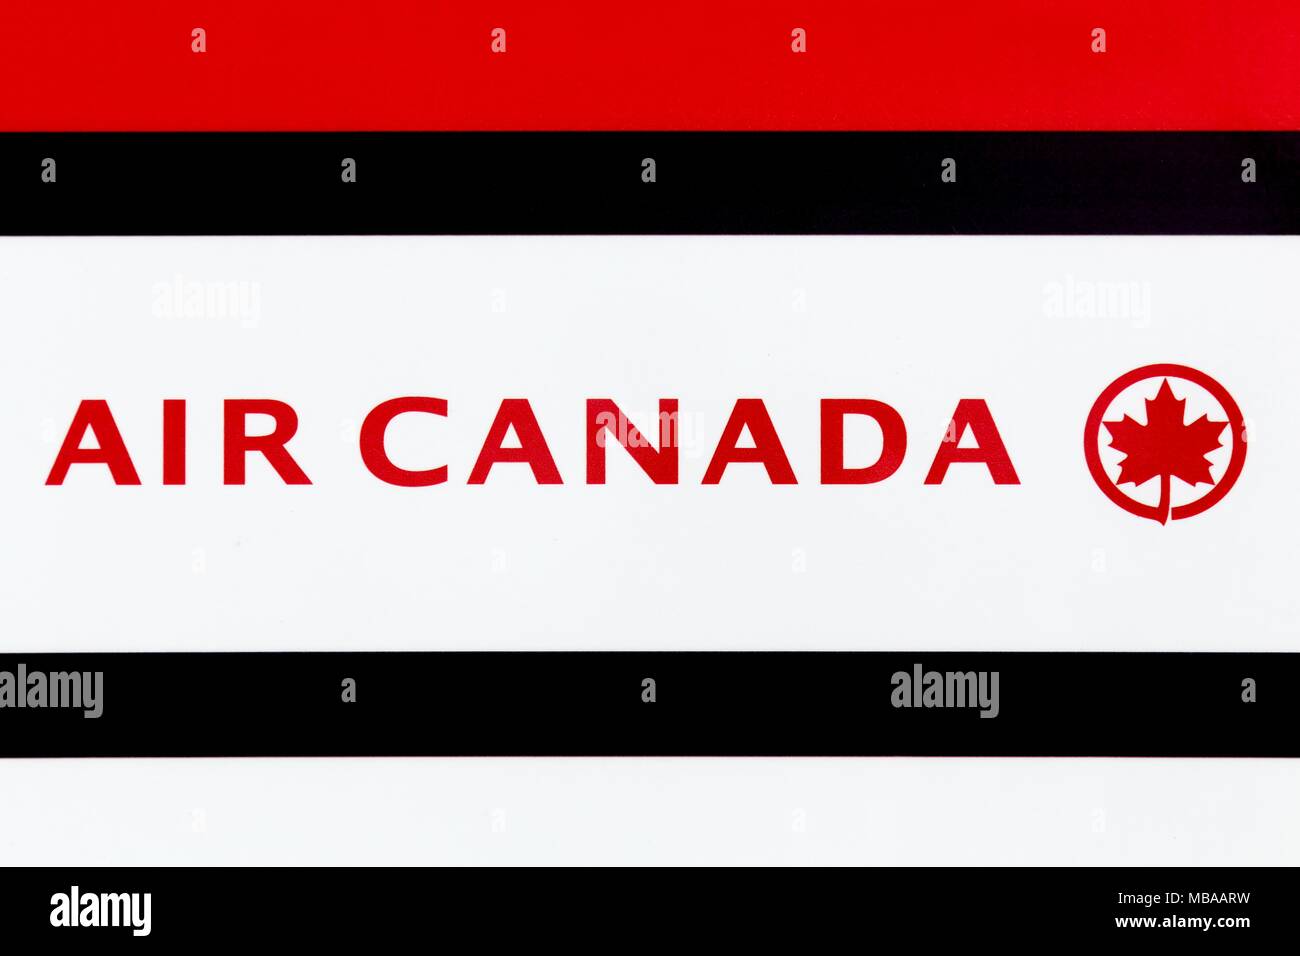 Colombier-Saugnieu, France - March 22, 2018: Air Canada logo on a panel. Air Canada is the flag carrier and largest airline of Canada Stock Photo